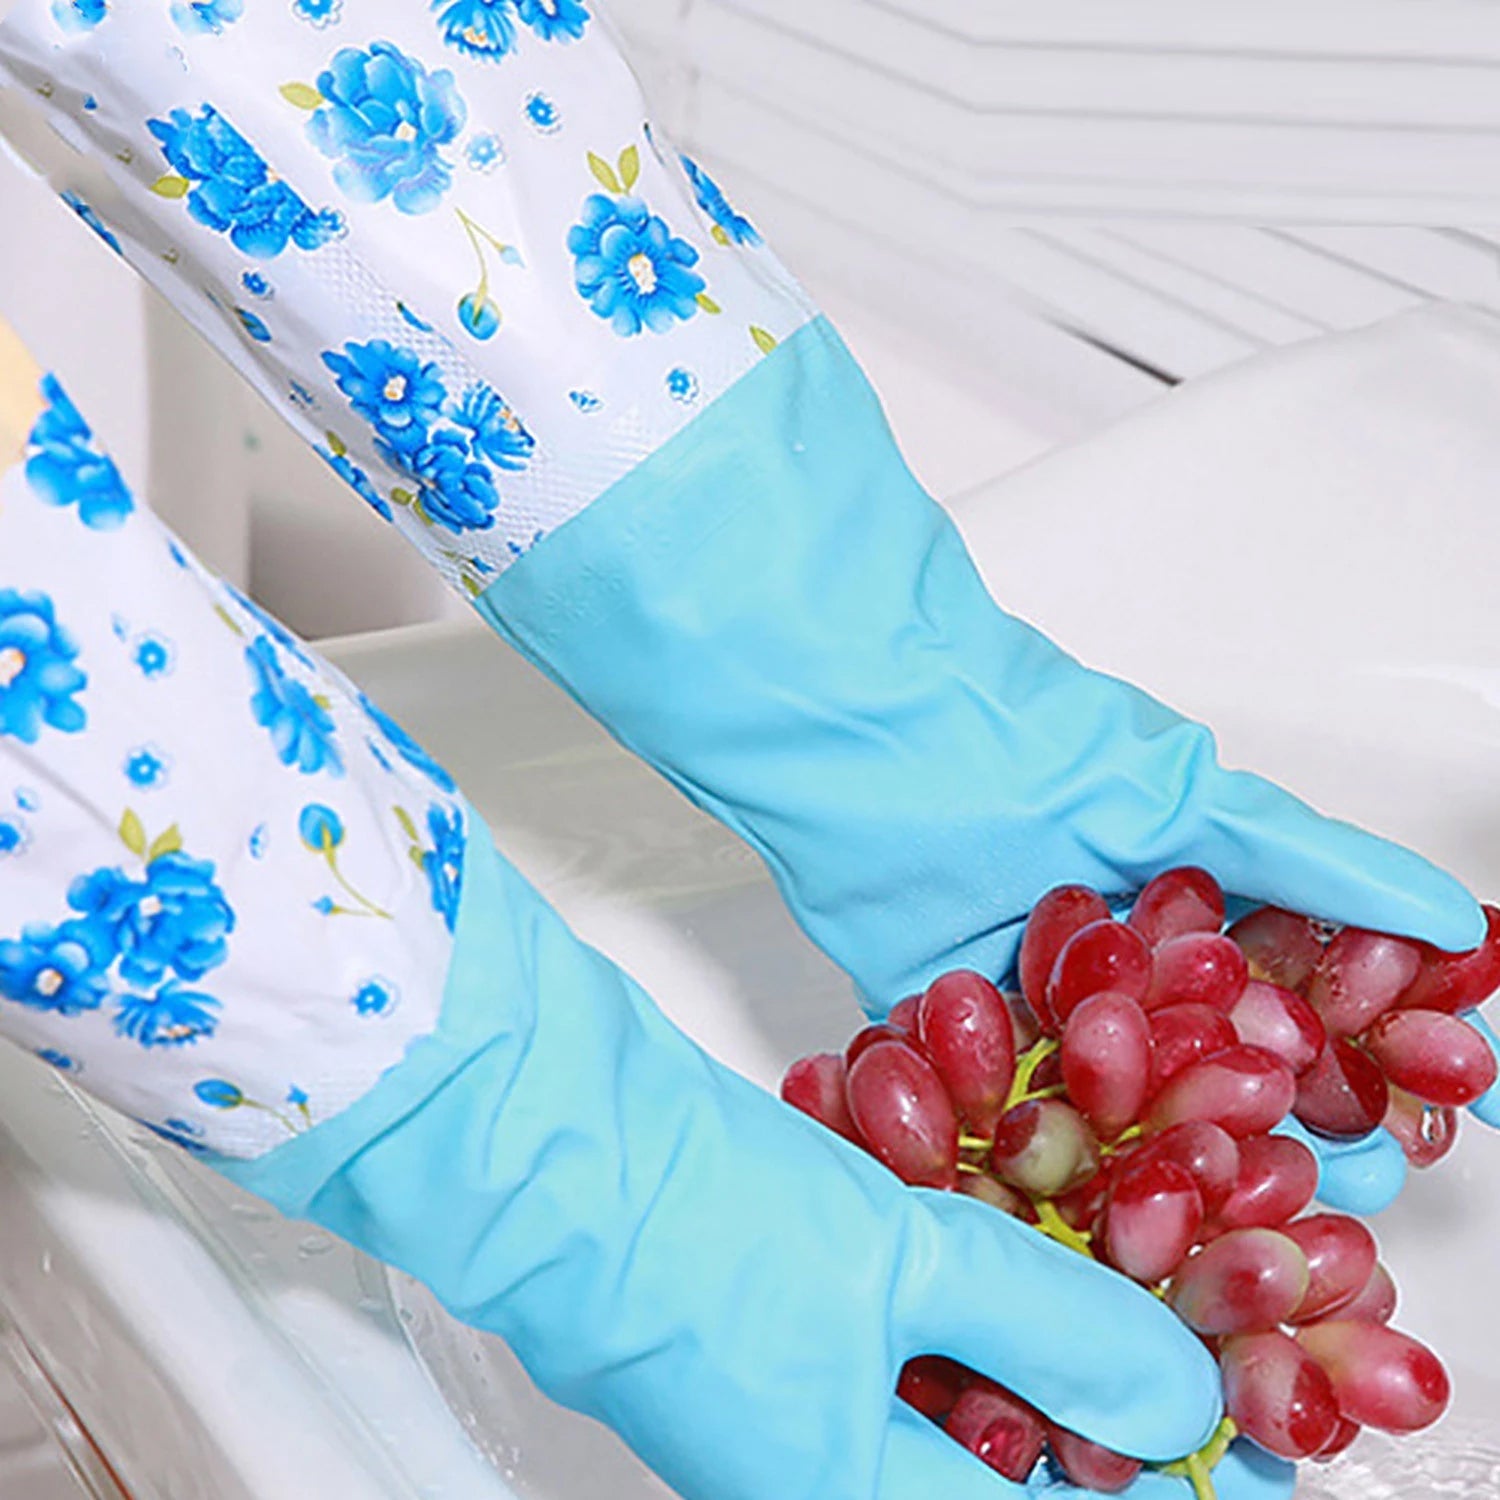 4855 2 Pair Large Blue Gloves For Different Types Of Purposes Like Washing Utensils, Gardening And Cleaning Toilet Etc. DeoDap